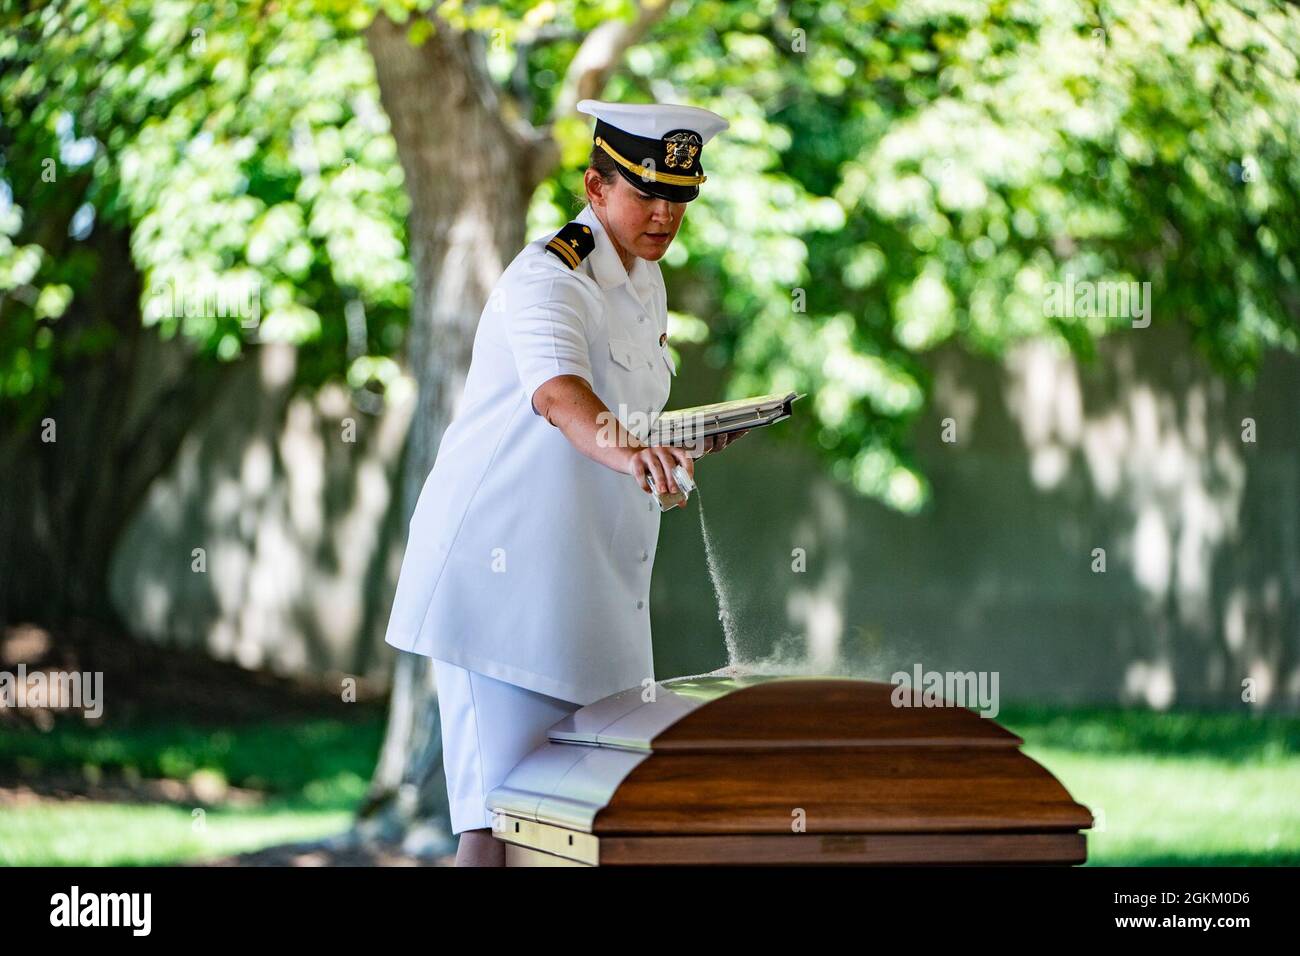 U.S. Navy Chaplain (Lt.) Chandler Irwin presides over the funeral service for U.S. Navy Radioman 3rd Class Thomas Griffith in Section 60 of Arlington National Cemetery, Arlington, Virginia, May 21, 2021.     Griffith was assigned to the battleship USS Oklahoma, which was moored at Ford Island, Pearl Harbor when it was attacked by Japanese aircraft on Dec. 7, 1941 during World War II. The USS Oklahoma sustained multiple torpedo hits, which caused it to quickly capsize. The attack on the ship resulted in the deaths of 429 crewmen, including Griffith, who was 20 years old. Griffith remained unide Stock Photo